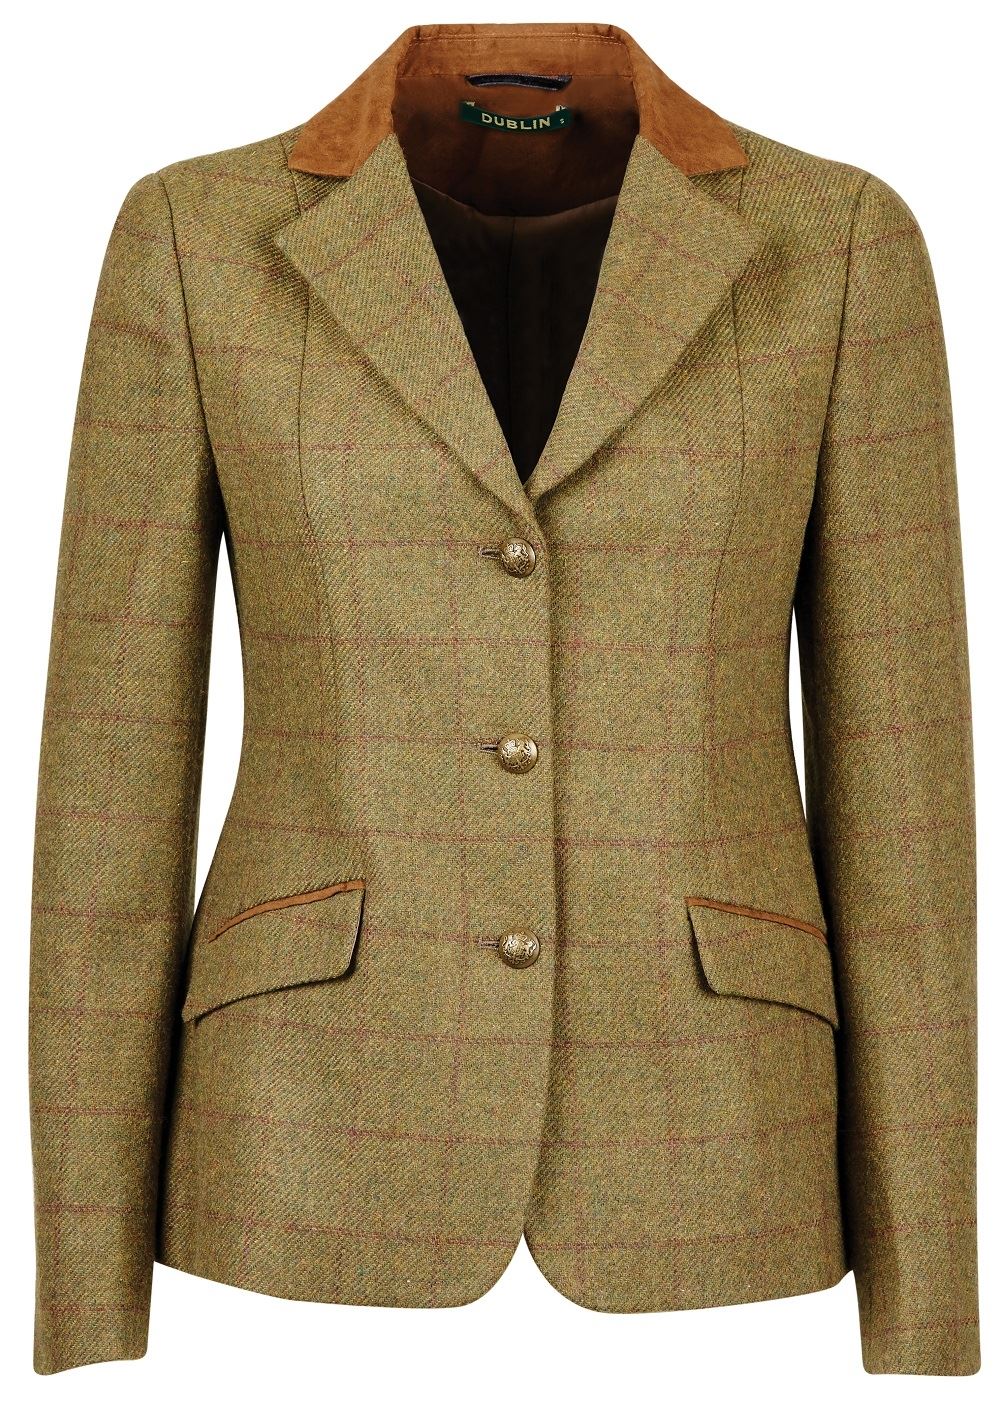 Dublin Albany Tweed Suede Collar Tailored Jacket - Just Horse Riders